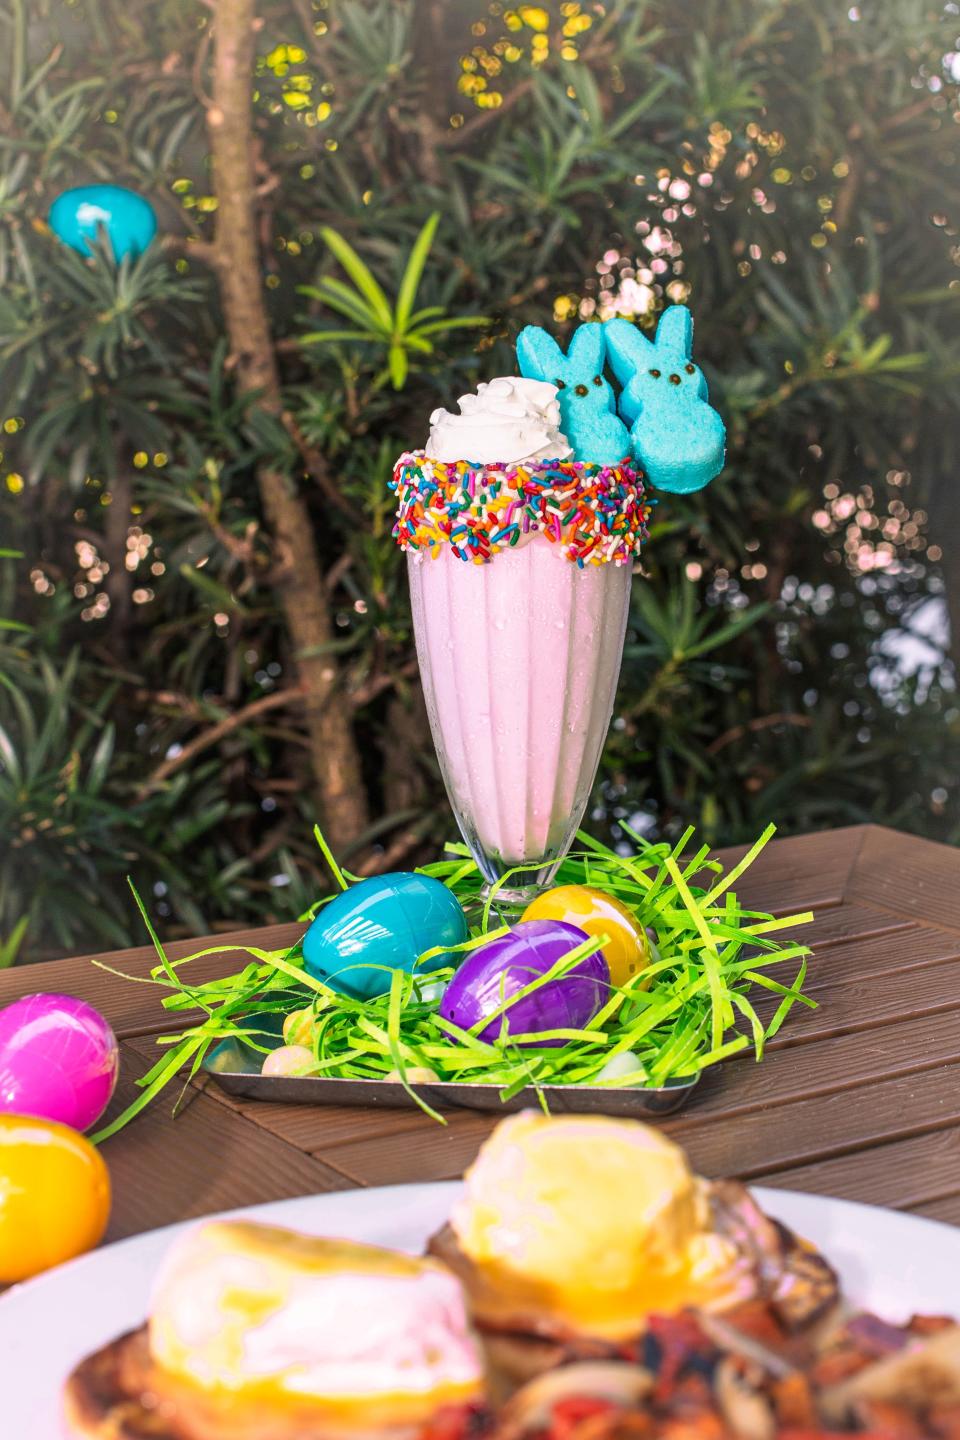 At Lake Park Diner, the "Sweet Strawbunny Surprise Super Shake” with toy-filled eggs offer chances to win a prize.